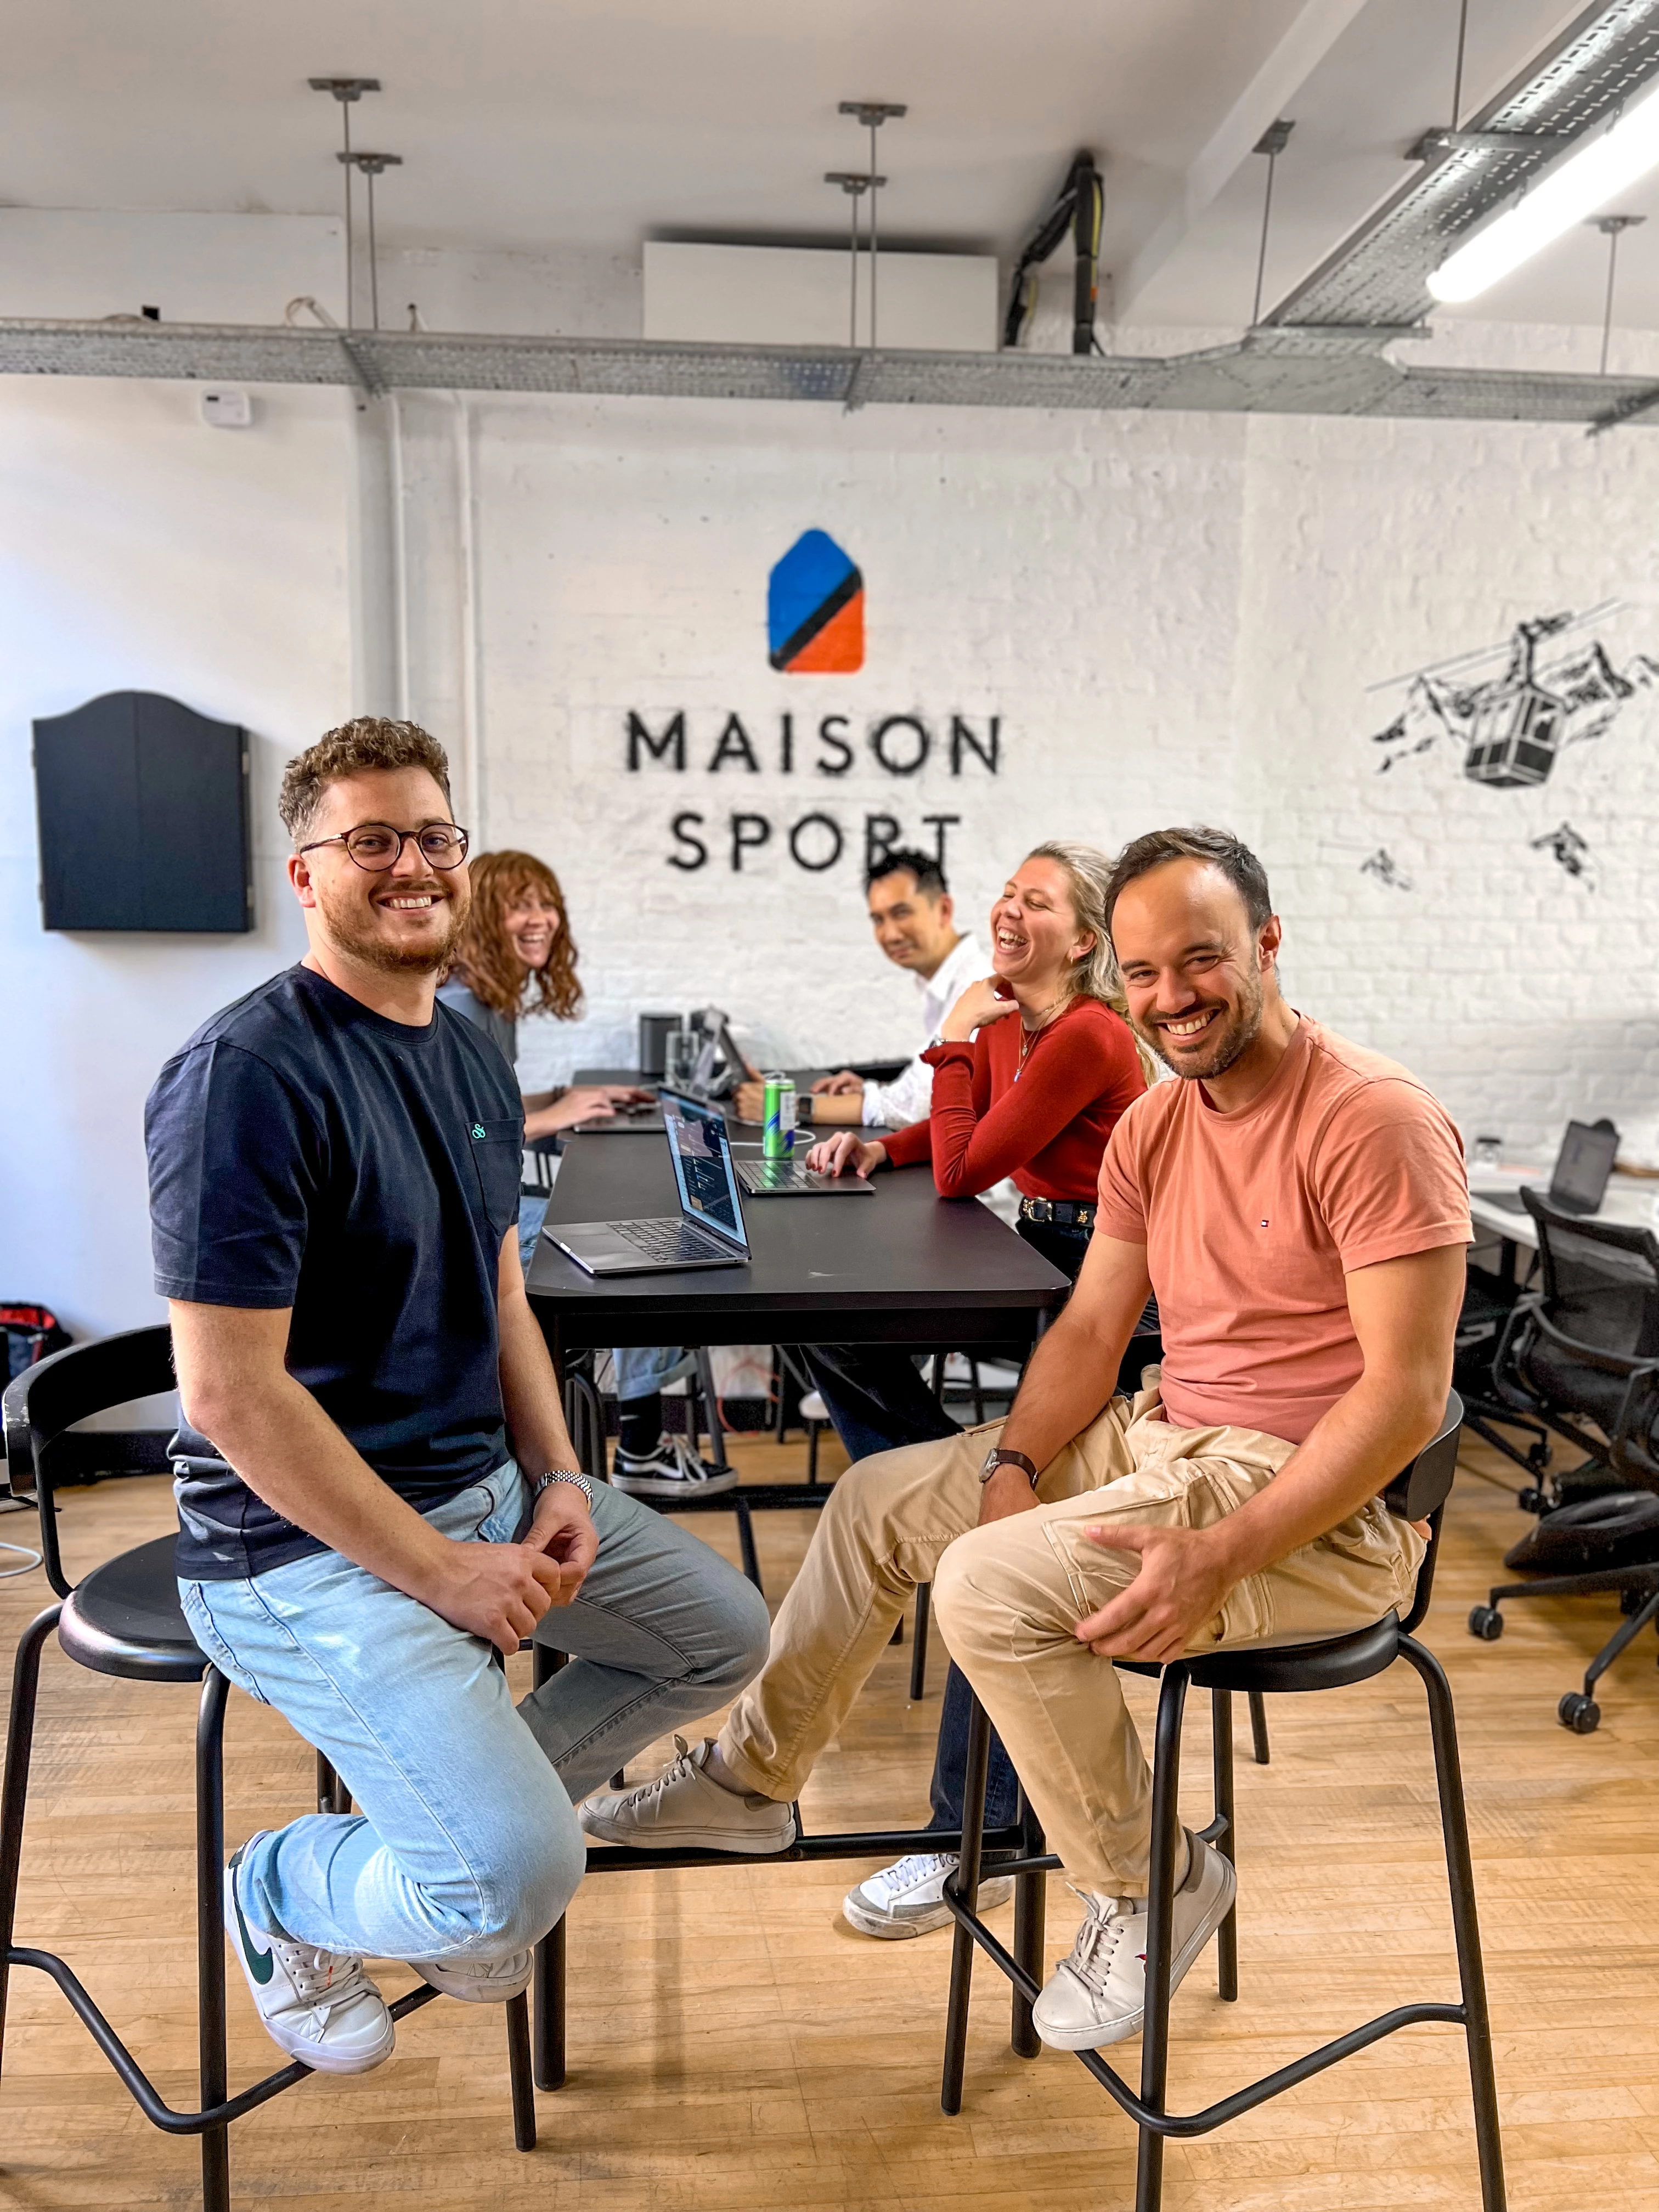 The Maison Sports team in their offices.